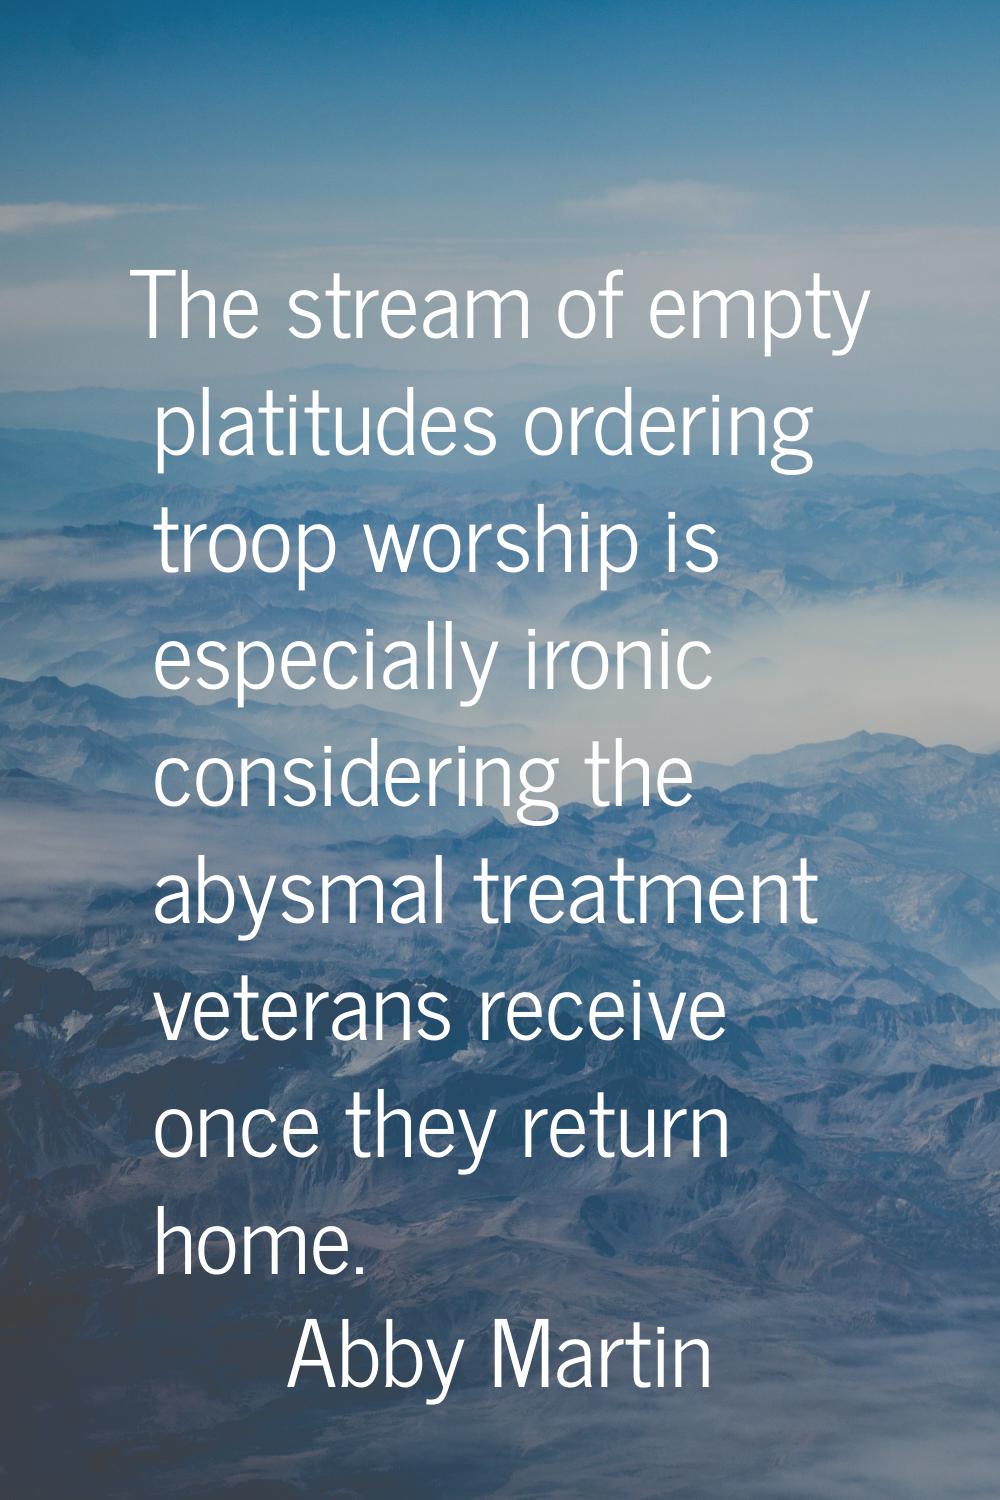 The stream of empty platitudes ordering troop worship is especially ironic considering the abysmal 